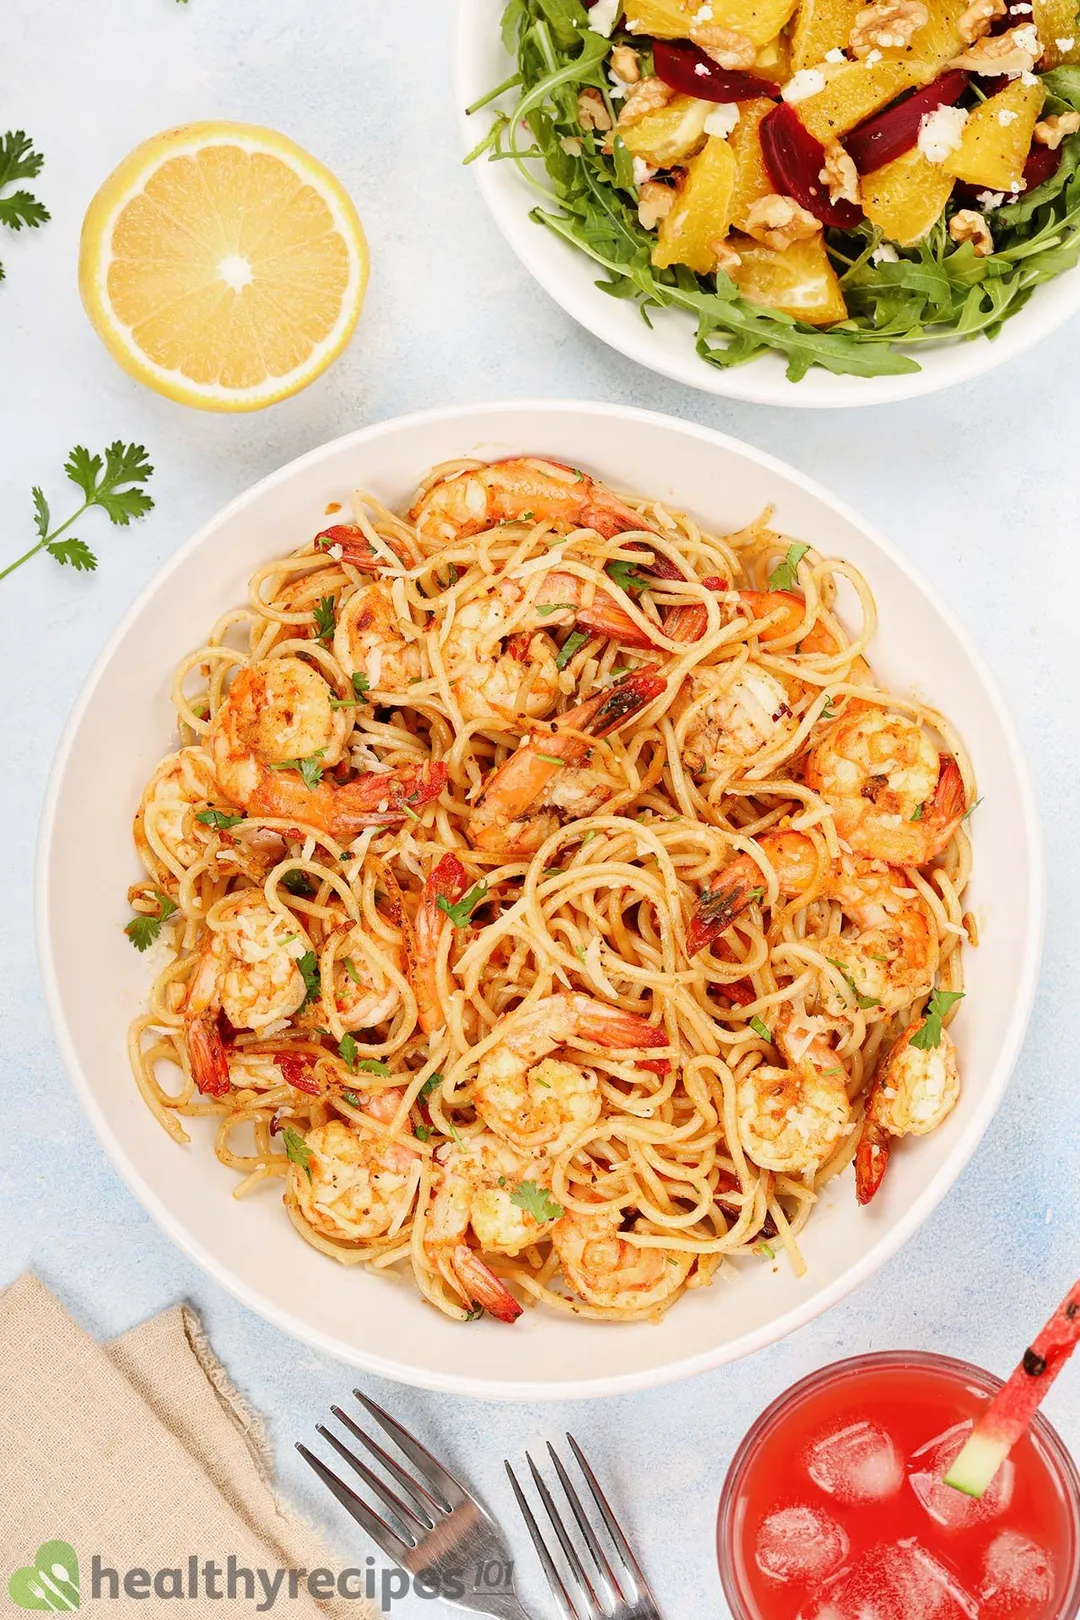 What to Serve with Shrimp Pasta